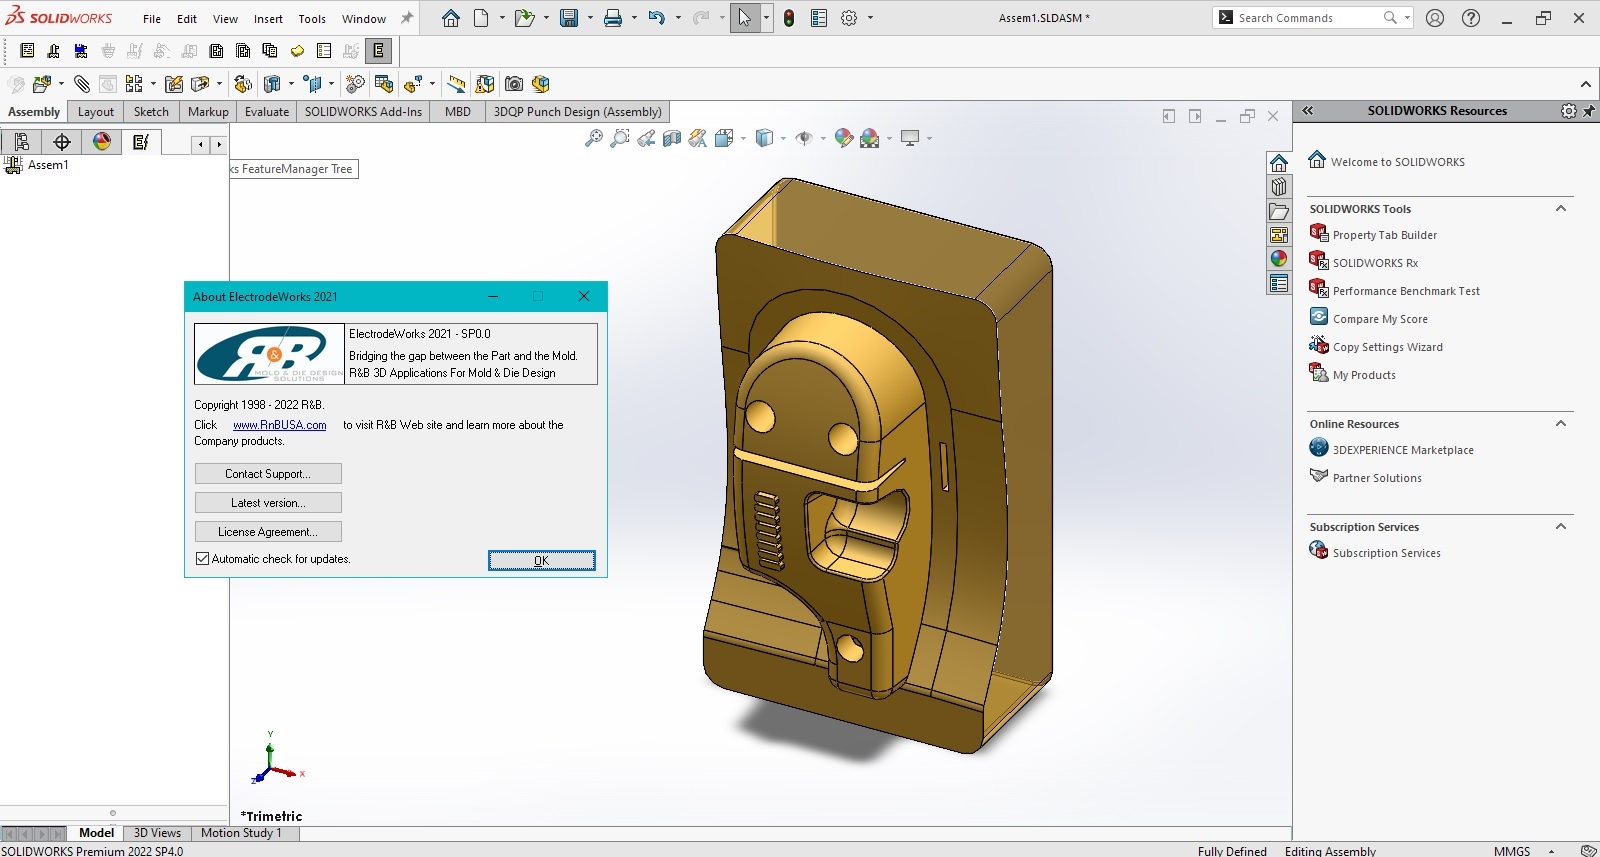 Working with R&B ElectrodeWorks 2021 SP0 for SolidWorks 2022 sp4.0